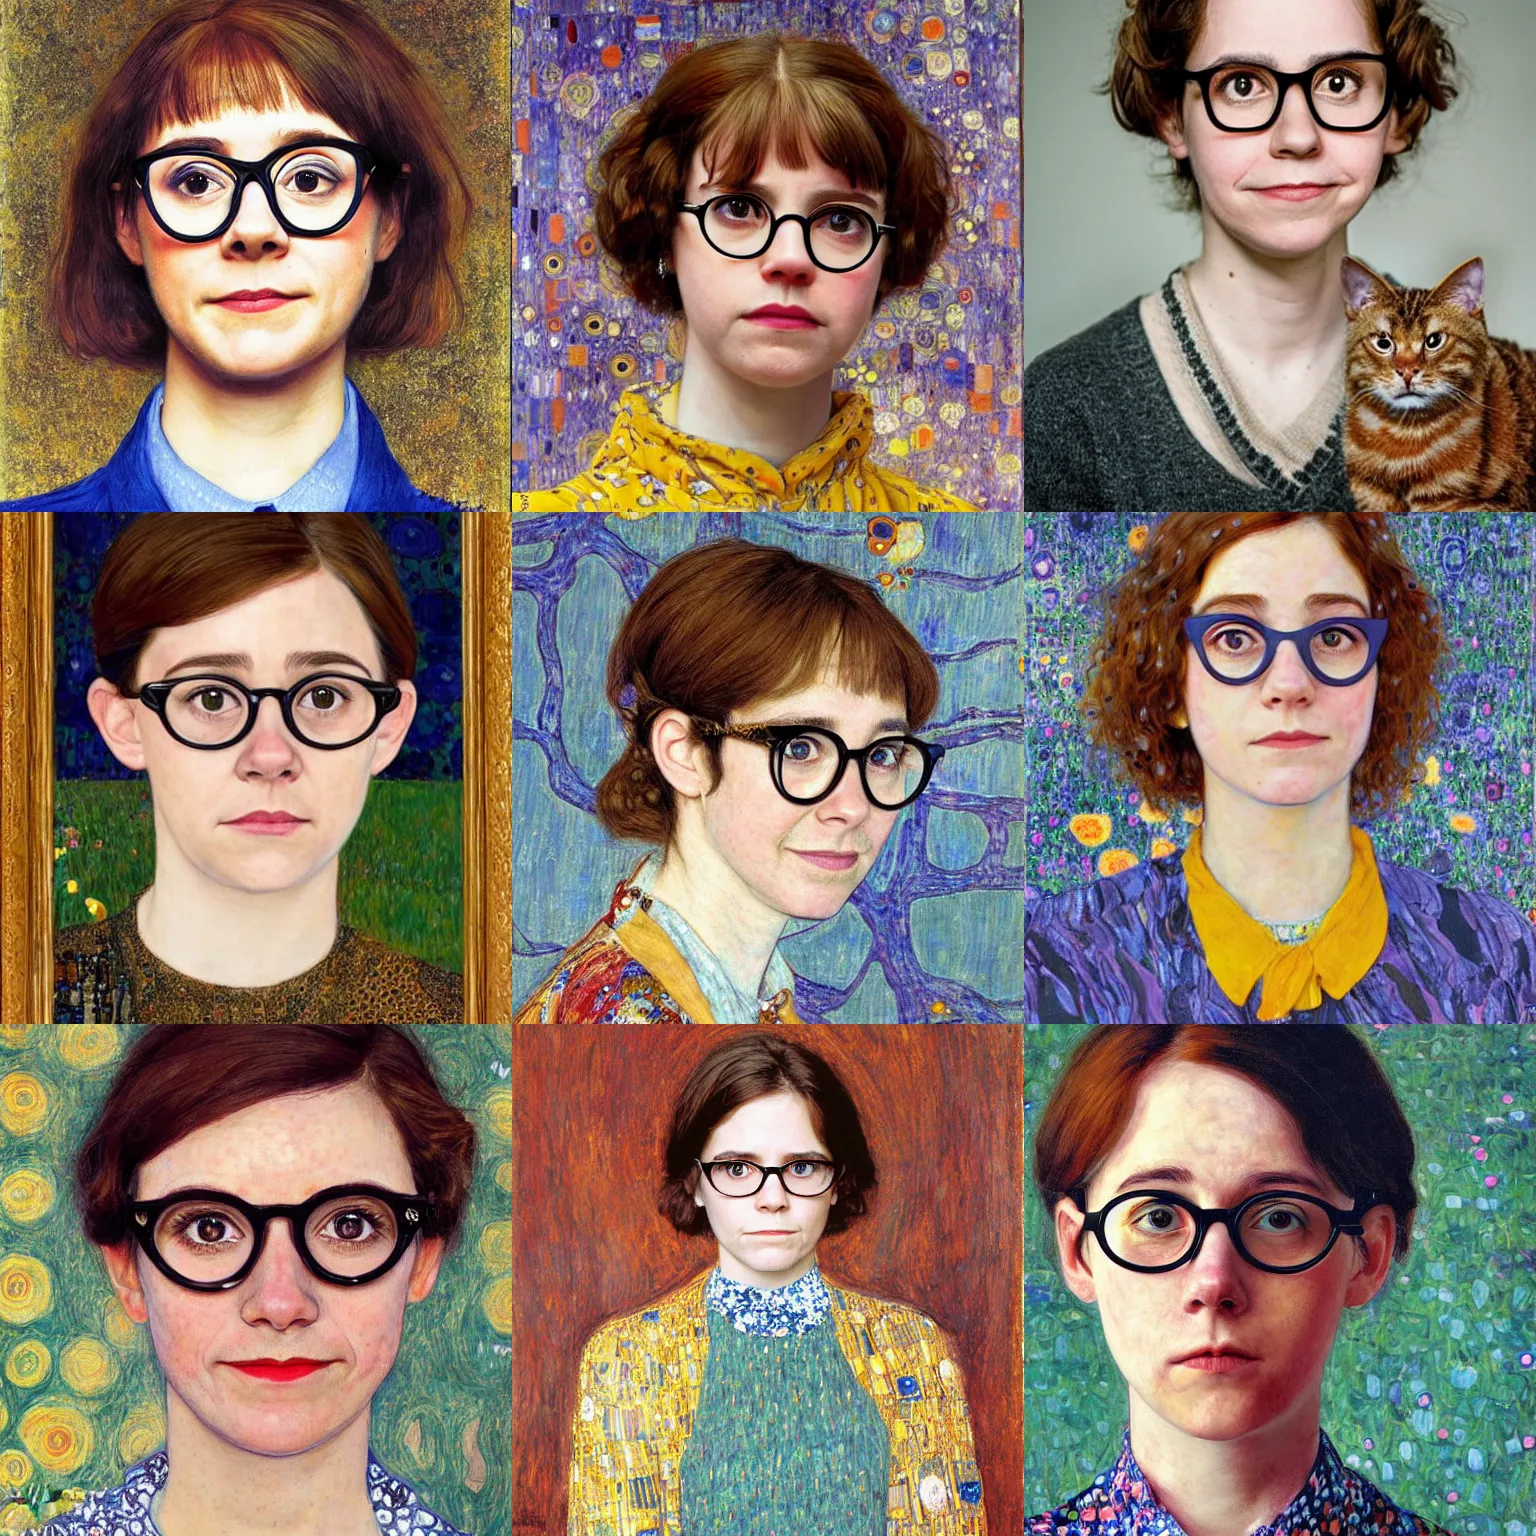 Prompt: a portrait of female asa Butterfield mixed with pam beesly, a slight smile, she is wearing cat-eye glasses by gustav klimt